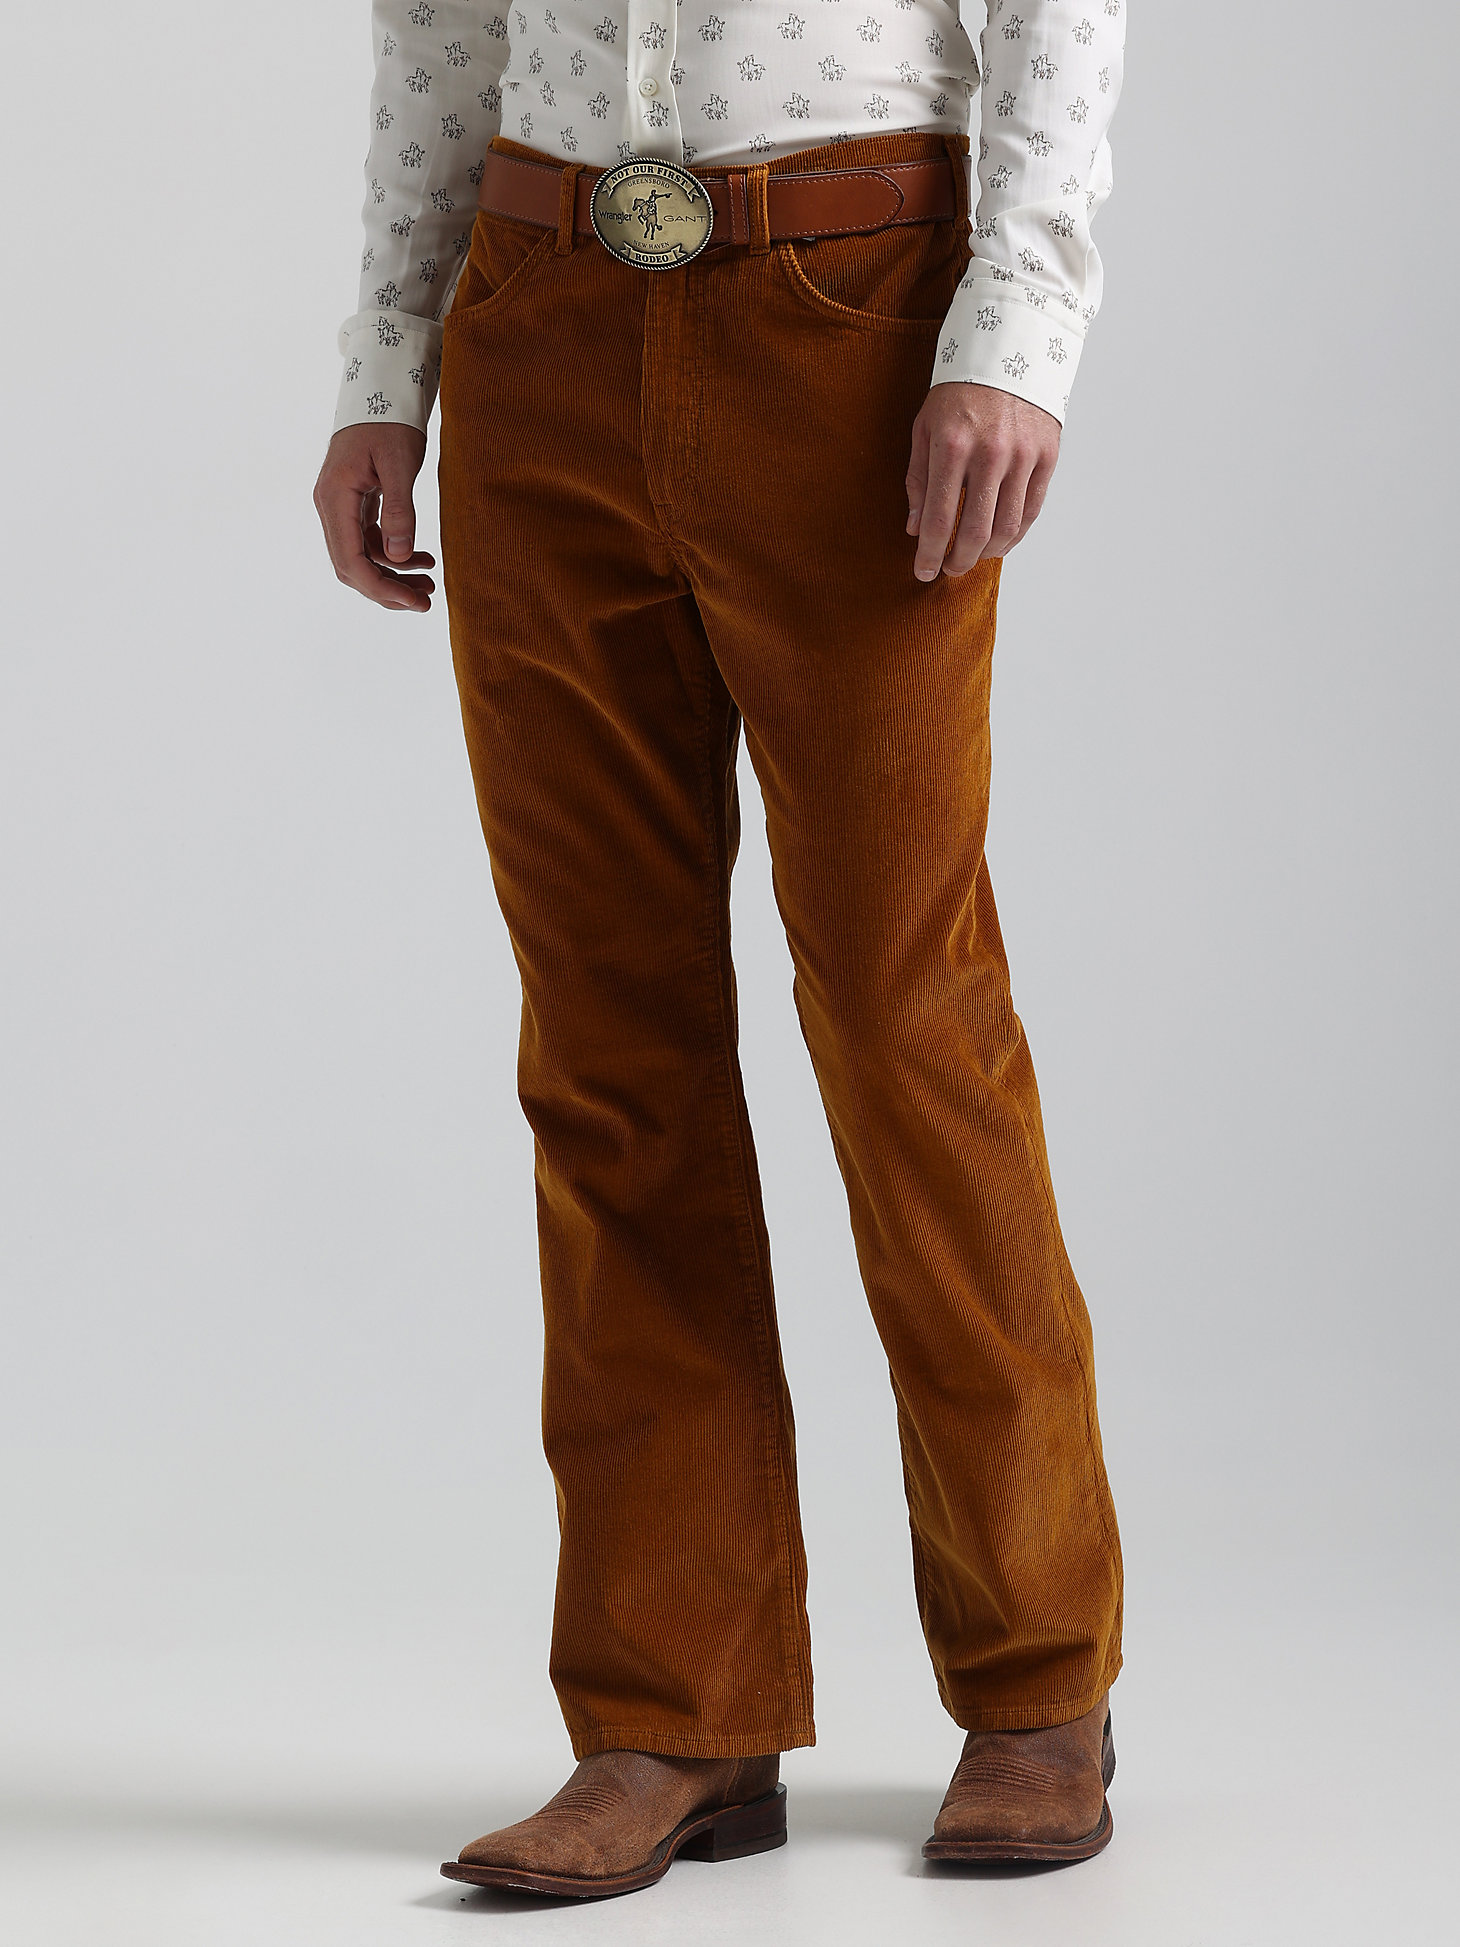 Bootcut Cord in Toffee Beige alternative view 2